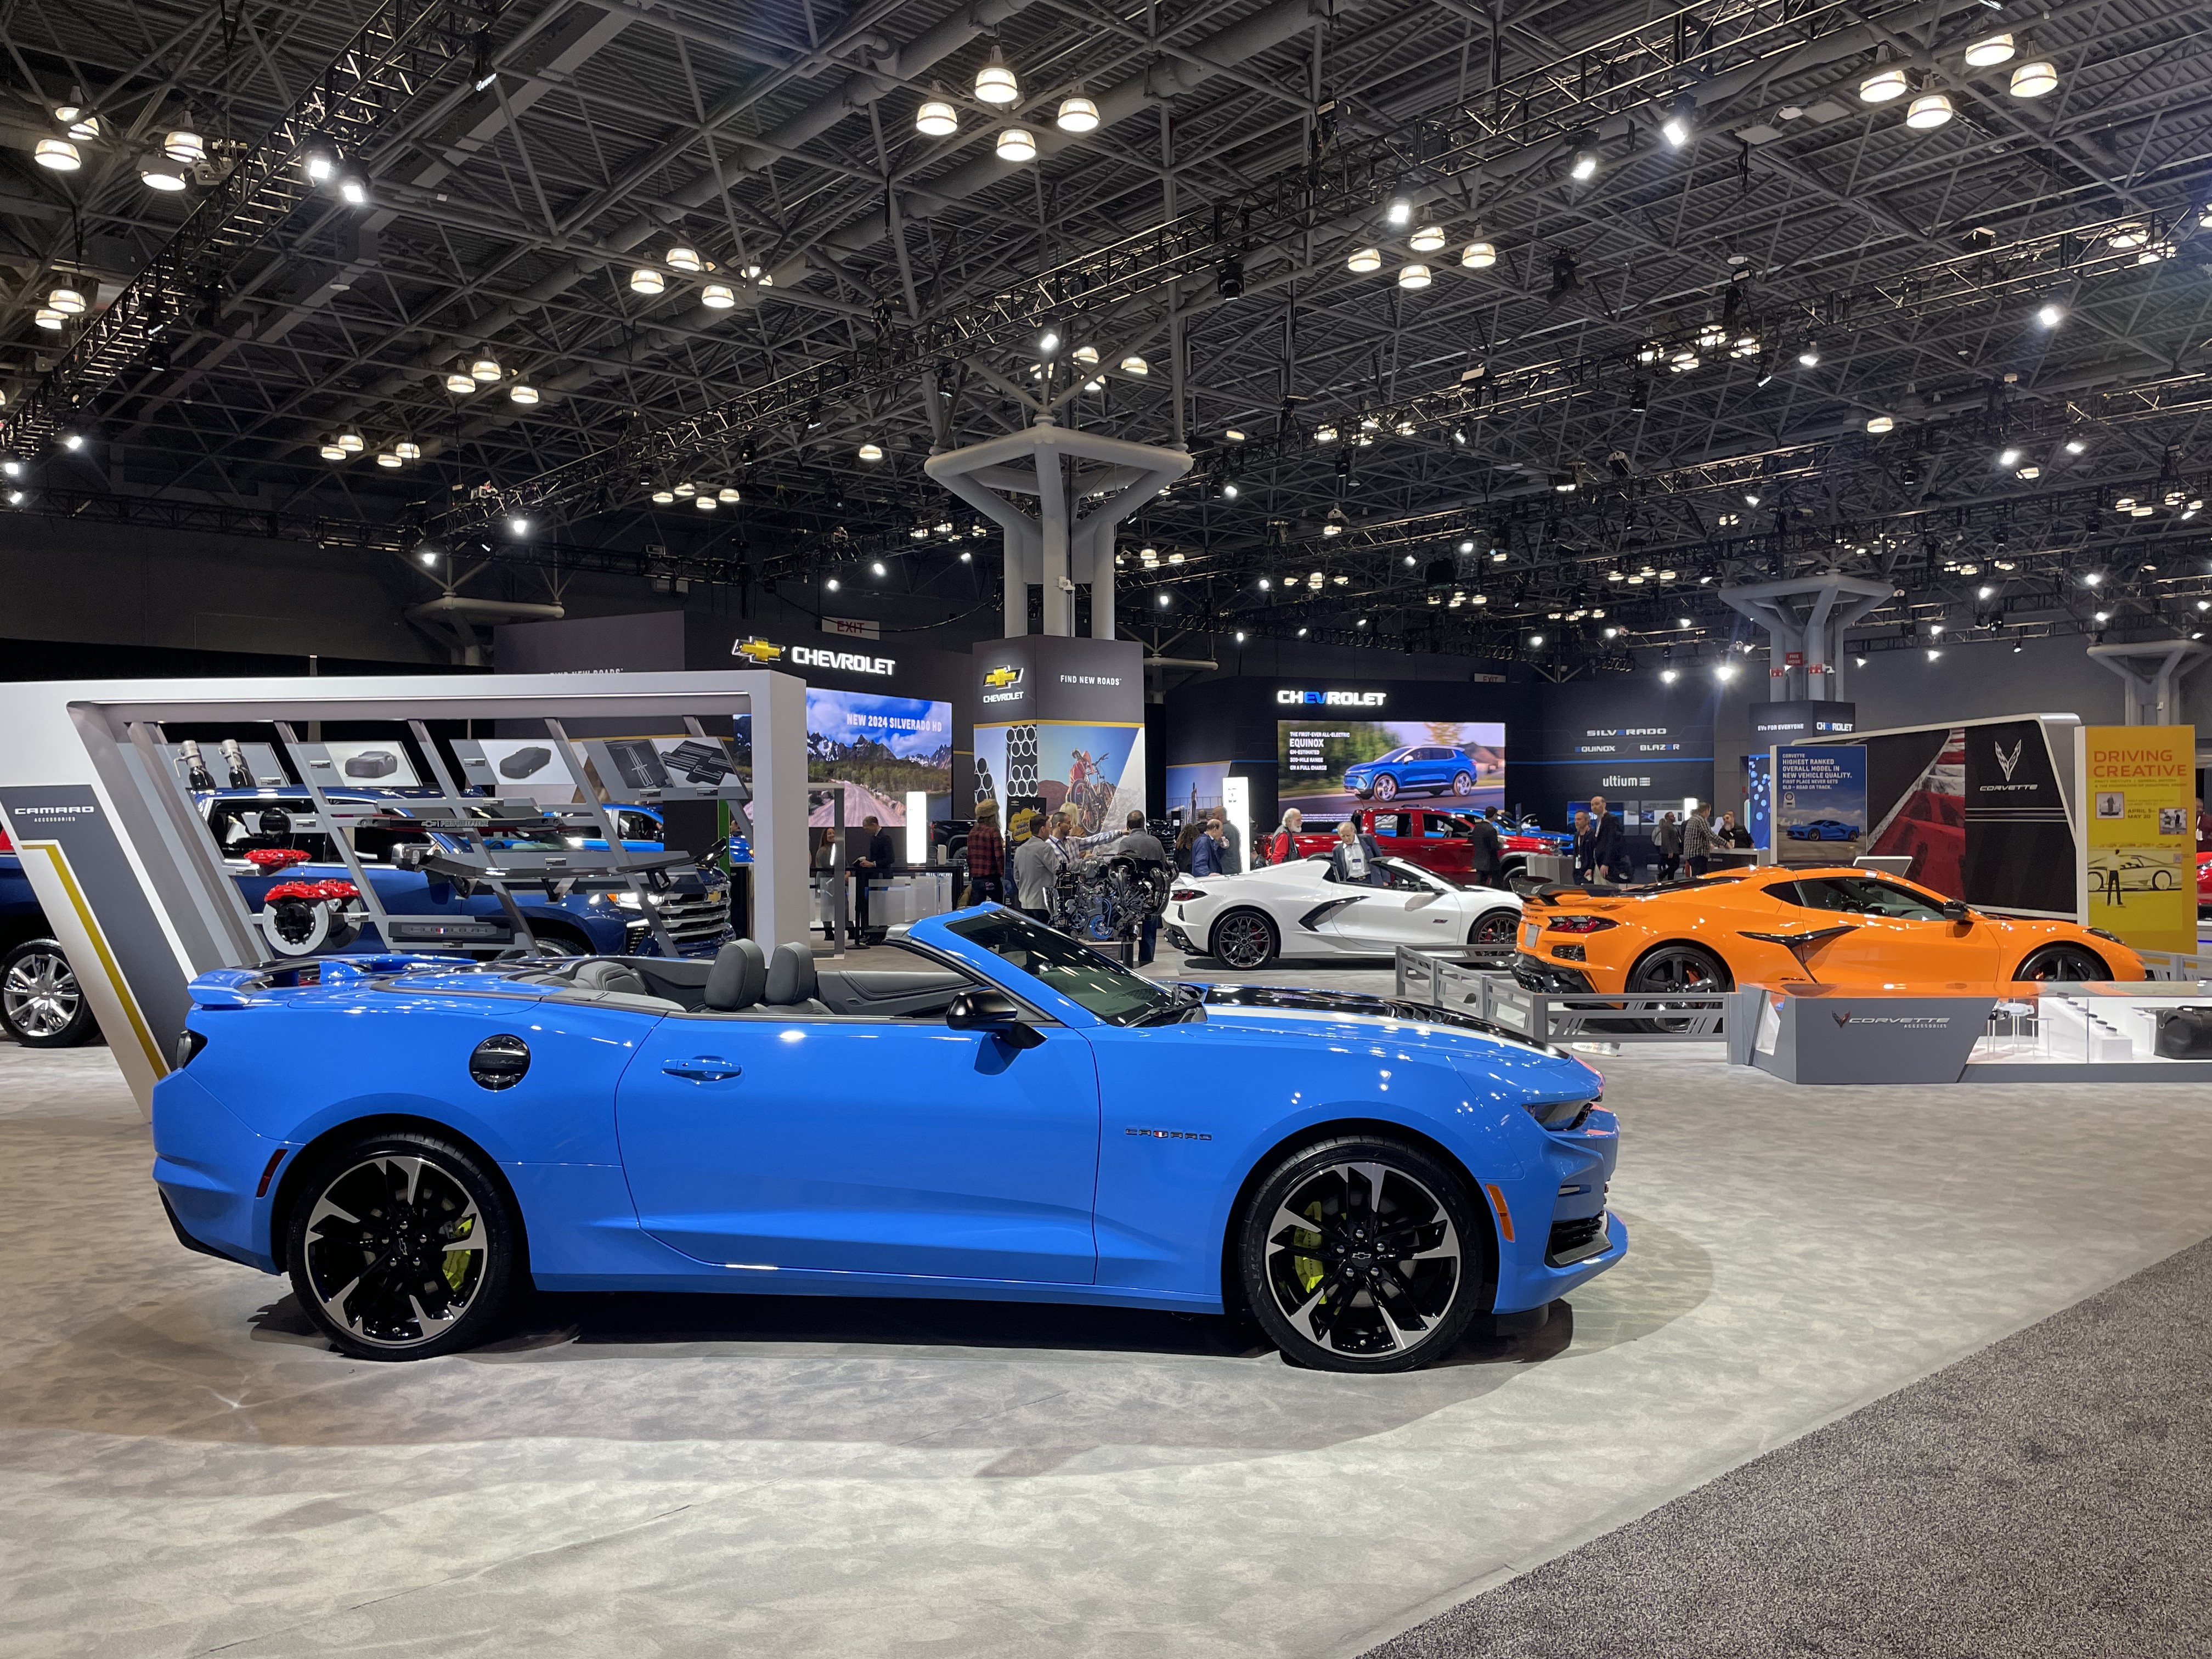 Which Carmakers Couldn't Care Less About Sports Car Displays at the New York Auto Show?